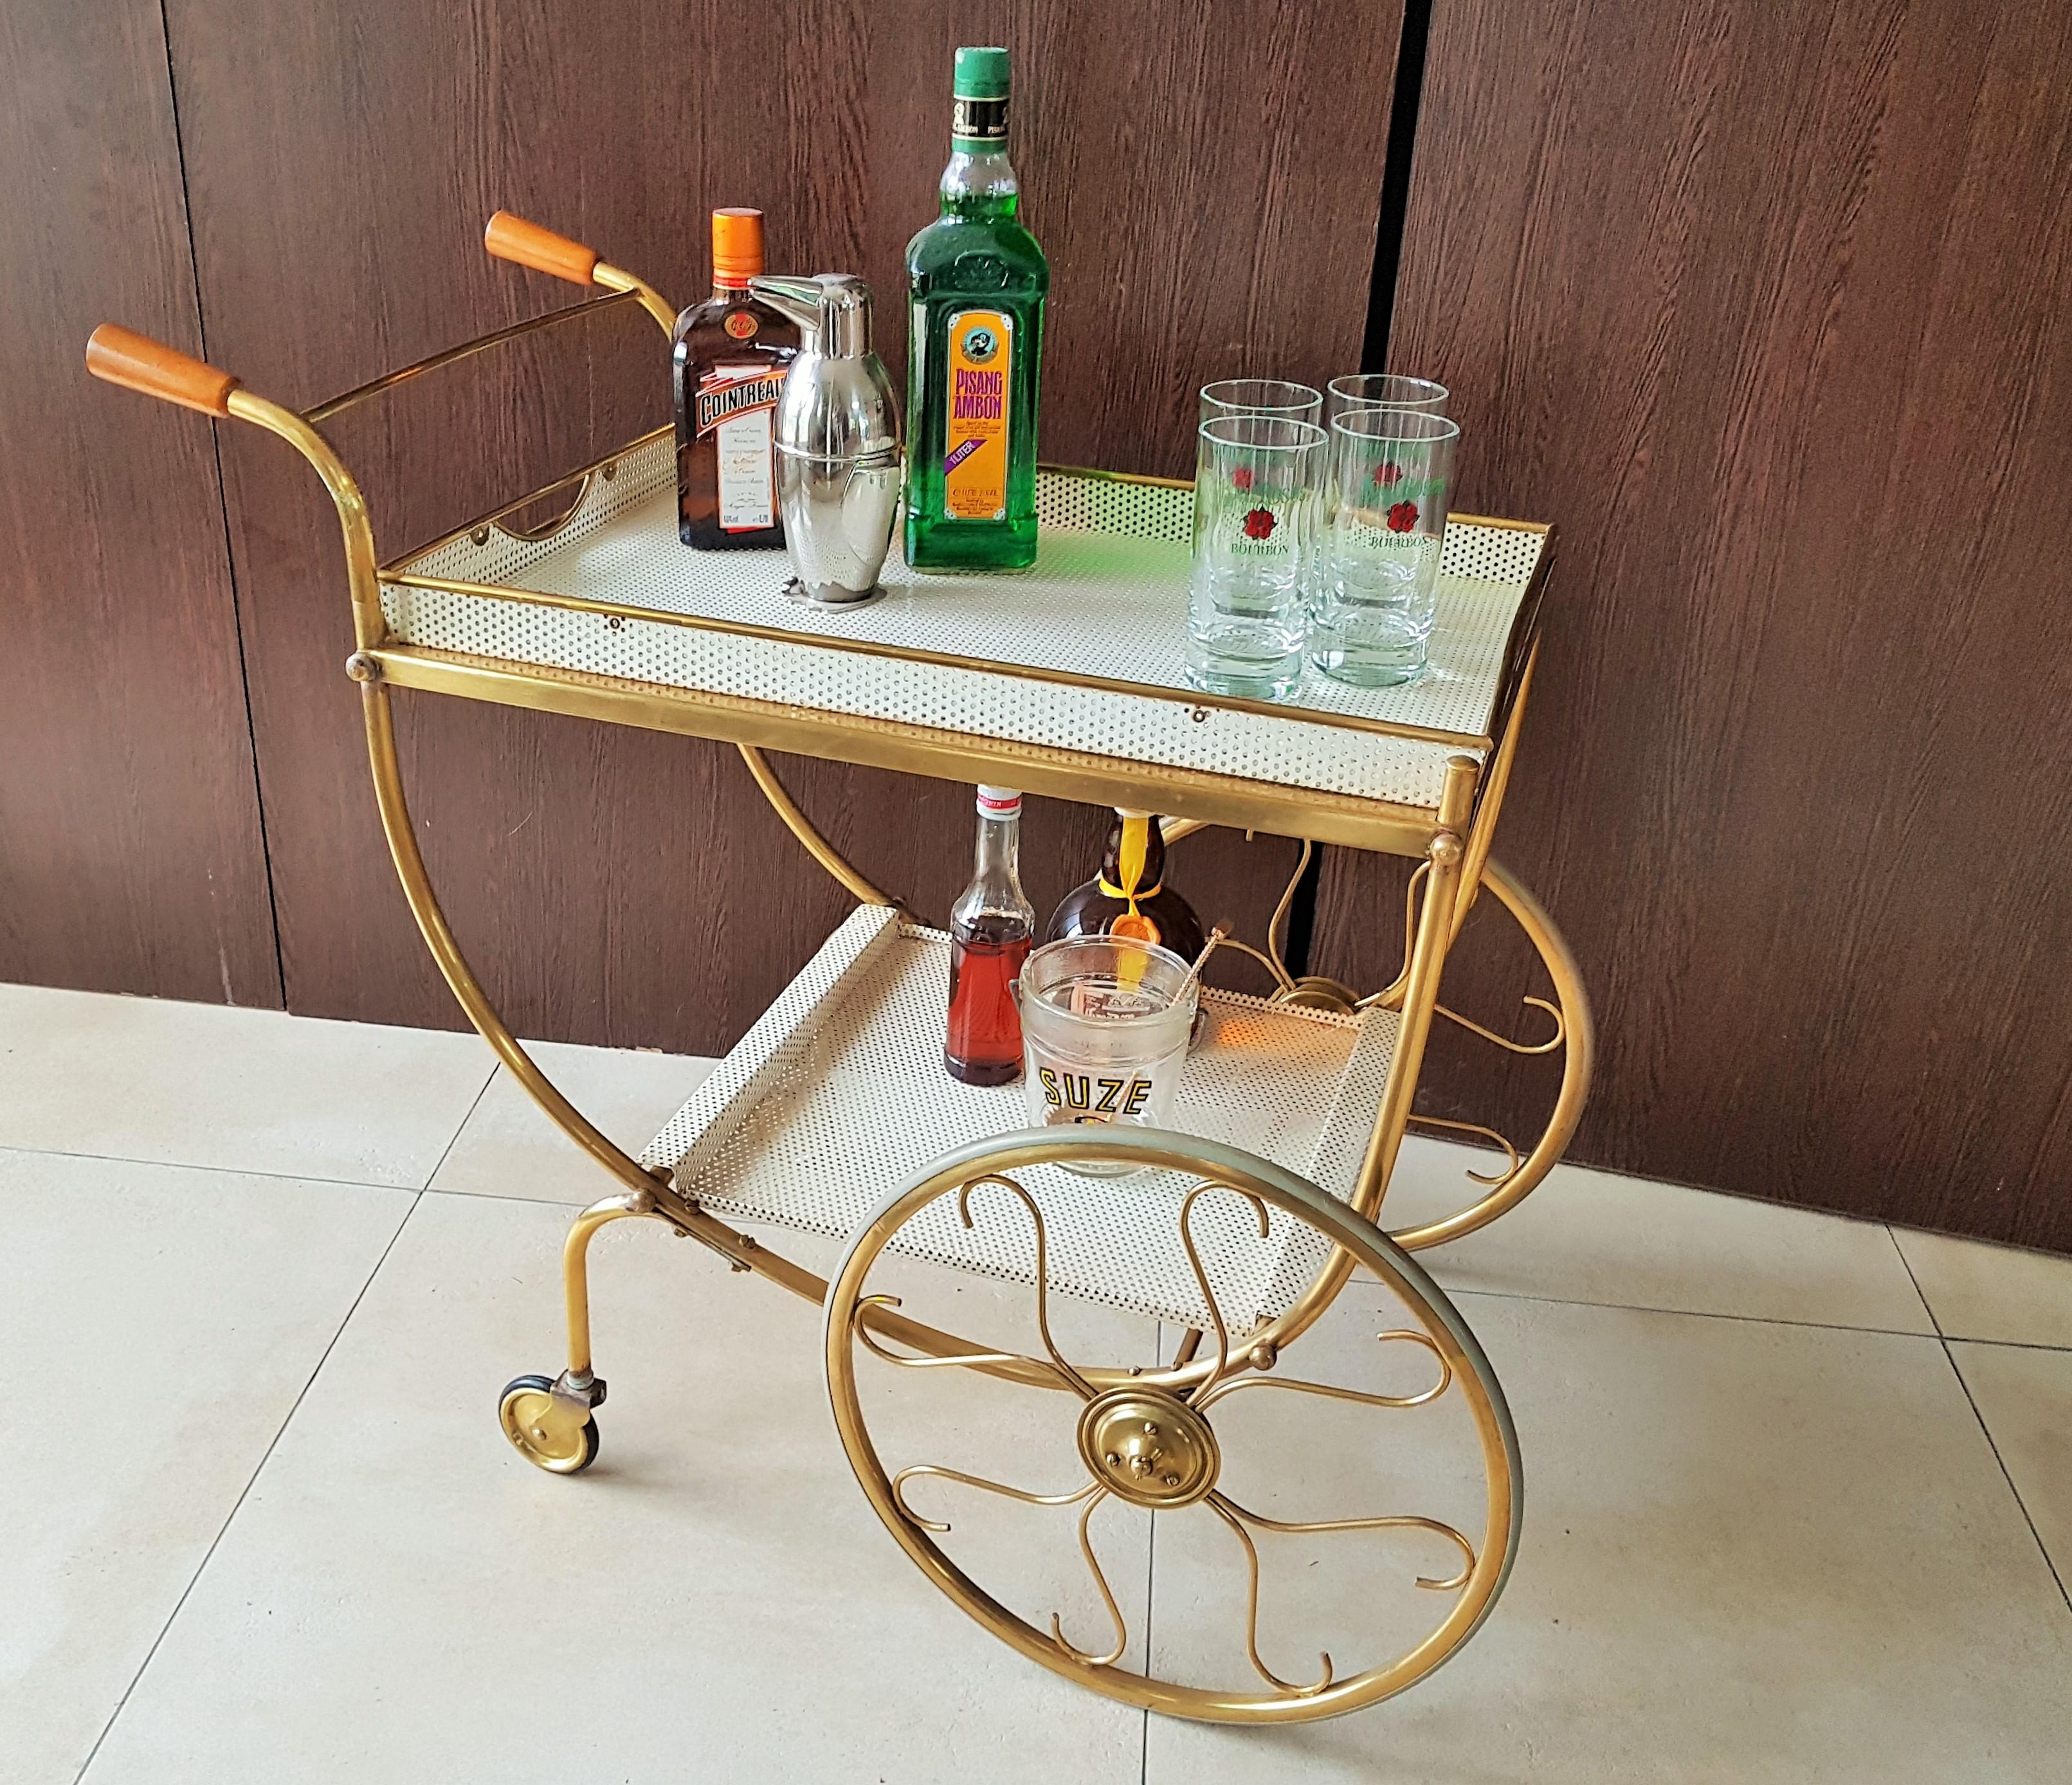 Midcentury brass bar cart by Josef Frank for manufacturer Svenskt Tenn, Sweden, 1950s

Made of tubular and perforated brass. White tin tabletops. Trays removable. Great unrestored original vintage condition.